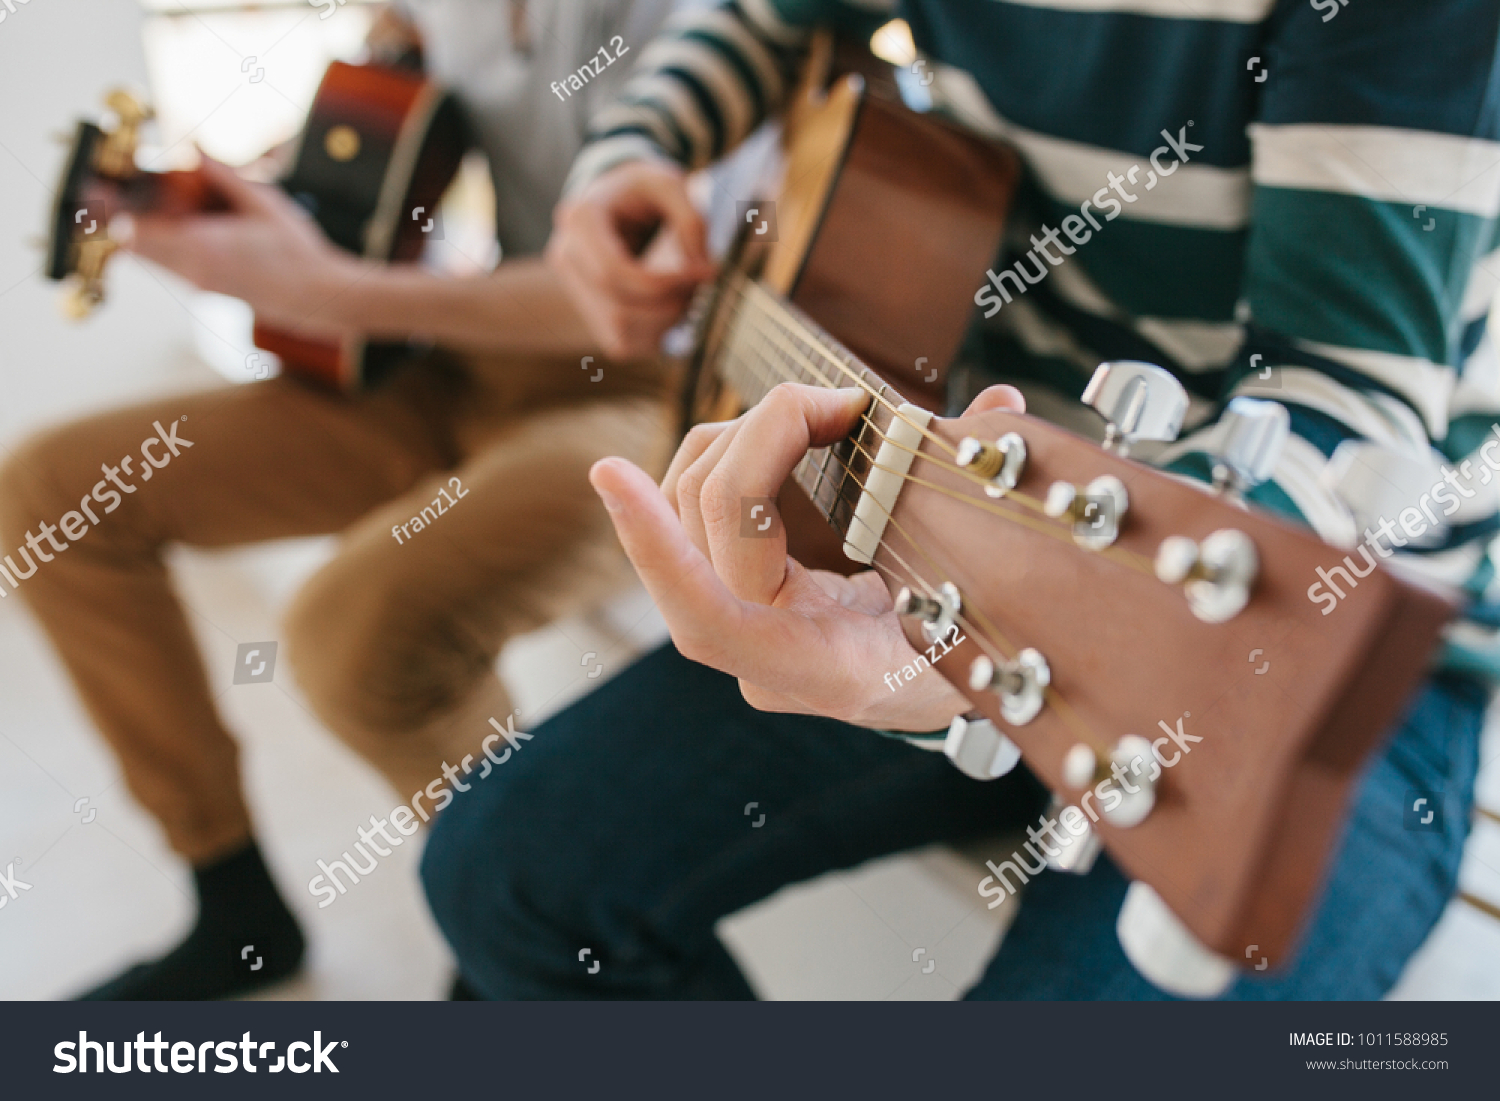 Learning to play the guitar. Music education and extracurricular lessons. Hobbies and enthusiasm for playing guitar and singing songs. #1011588985